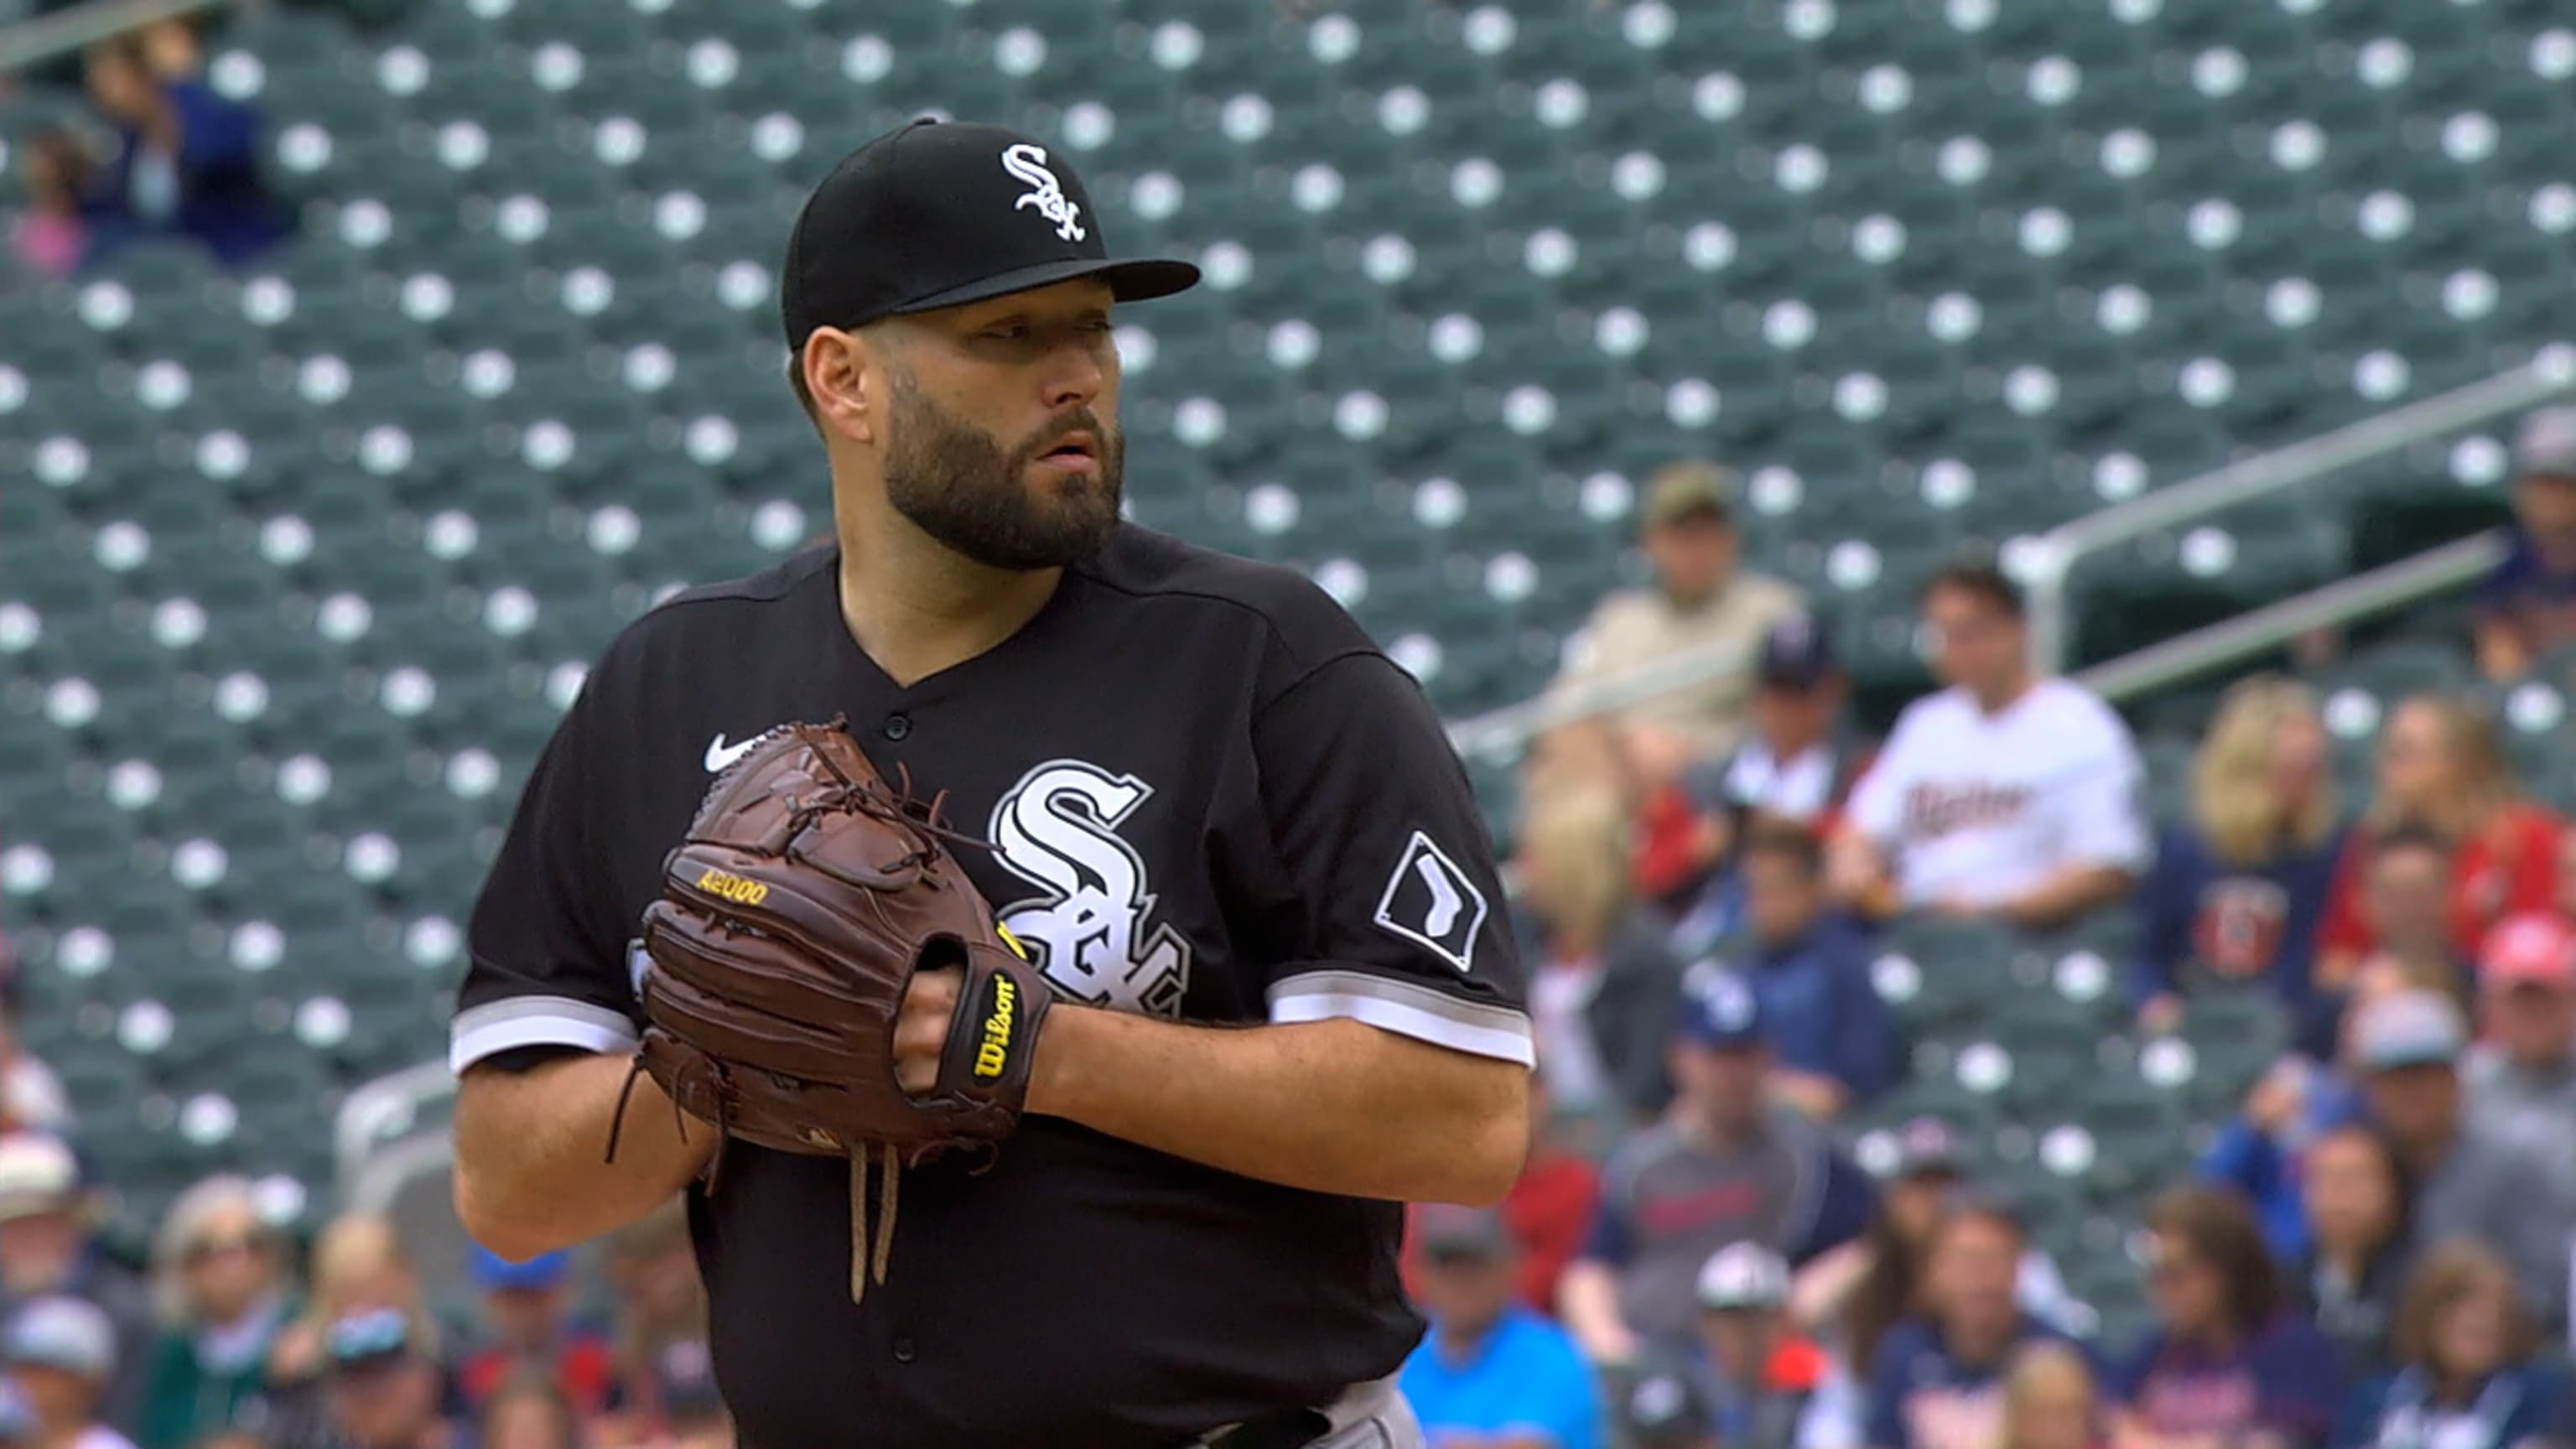 Lance Lynn, White Sox agree to 2-year extension